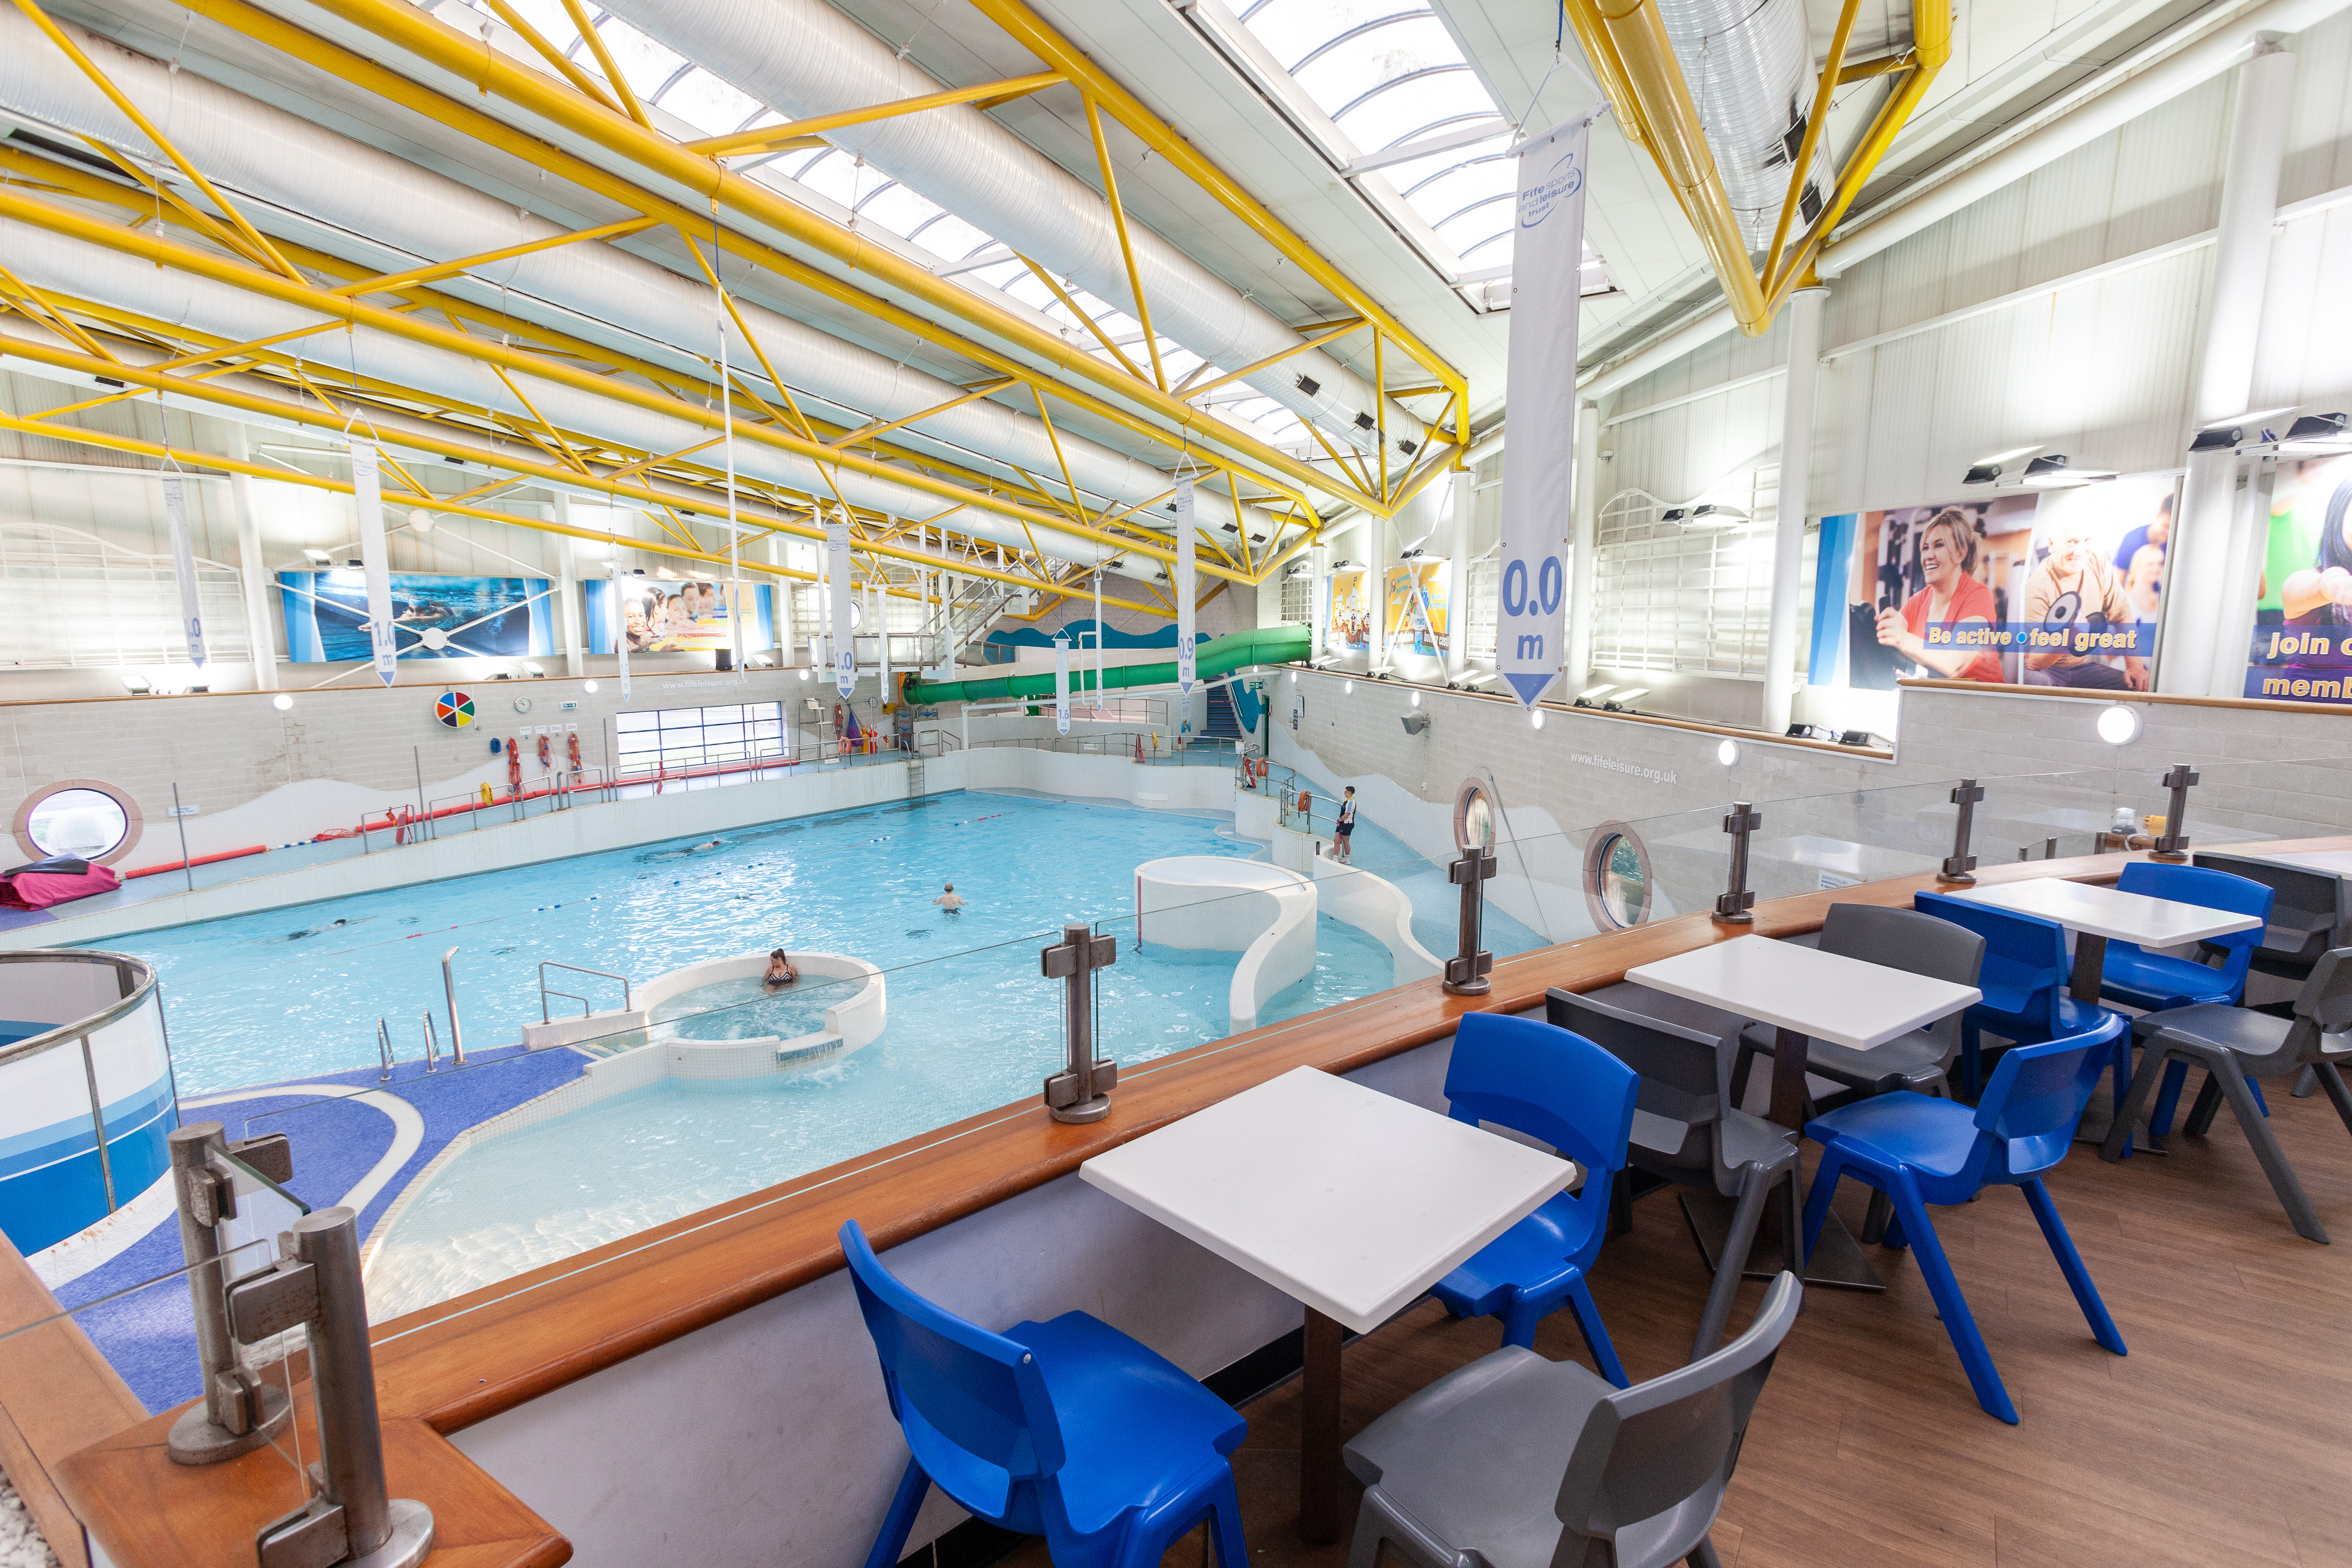 Leven Swimming Pool & Sport Centre Offers 